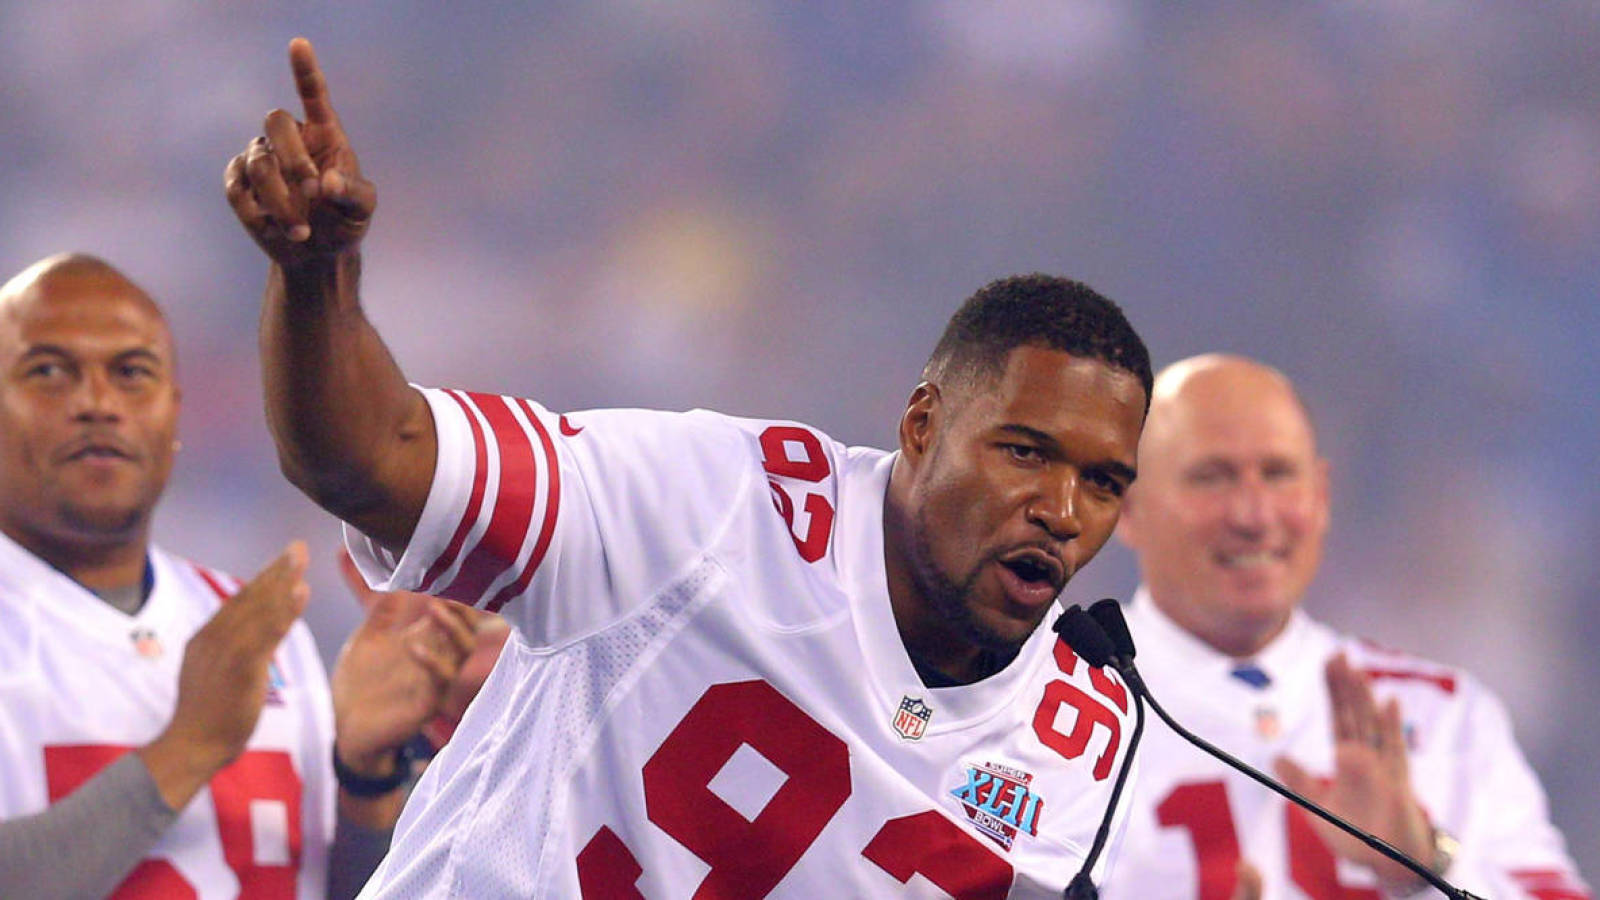 Giants to retire Michael Strahan's No. 92 jersey